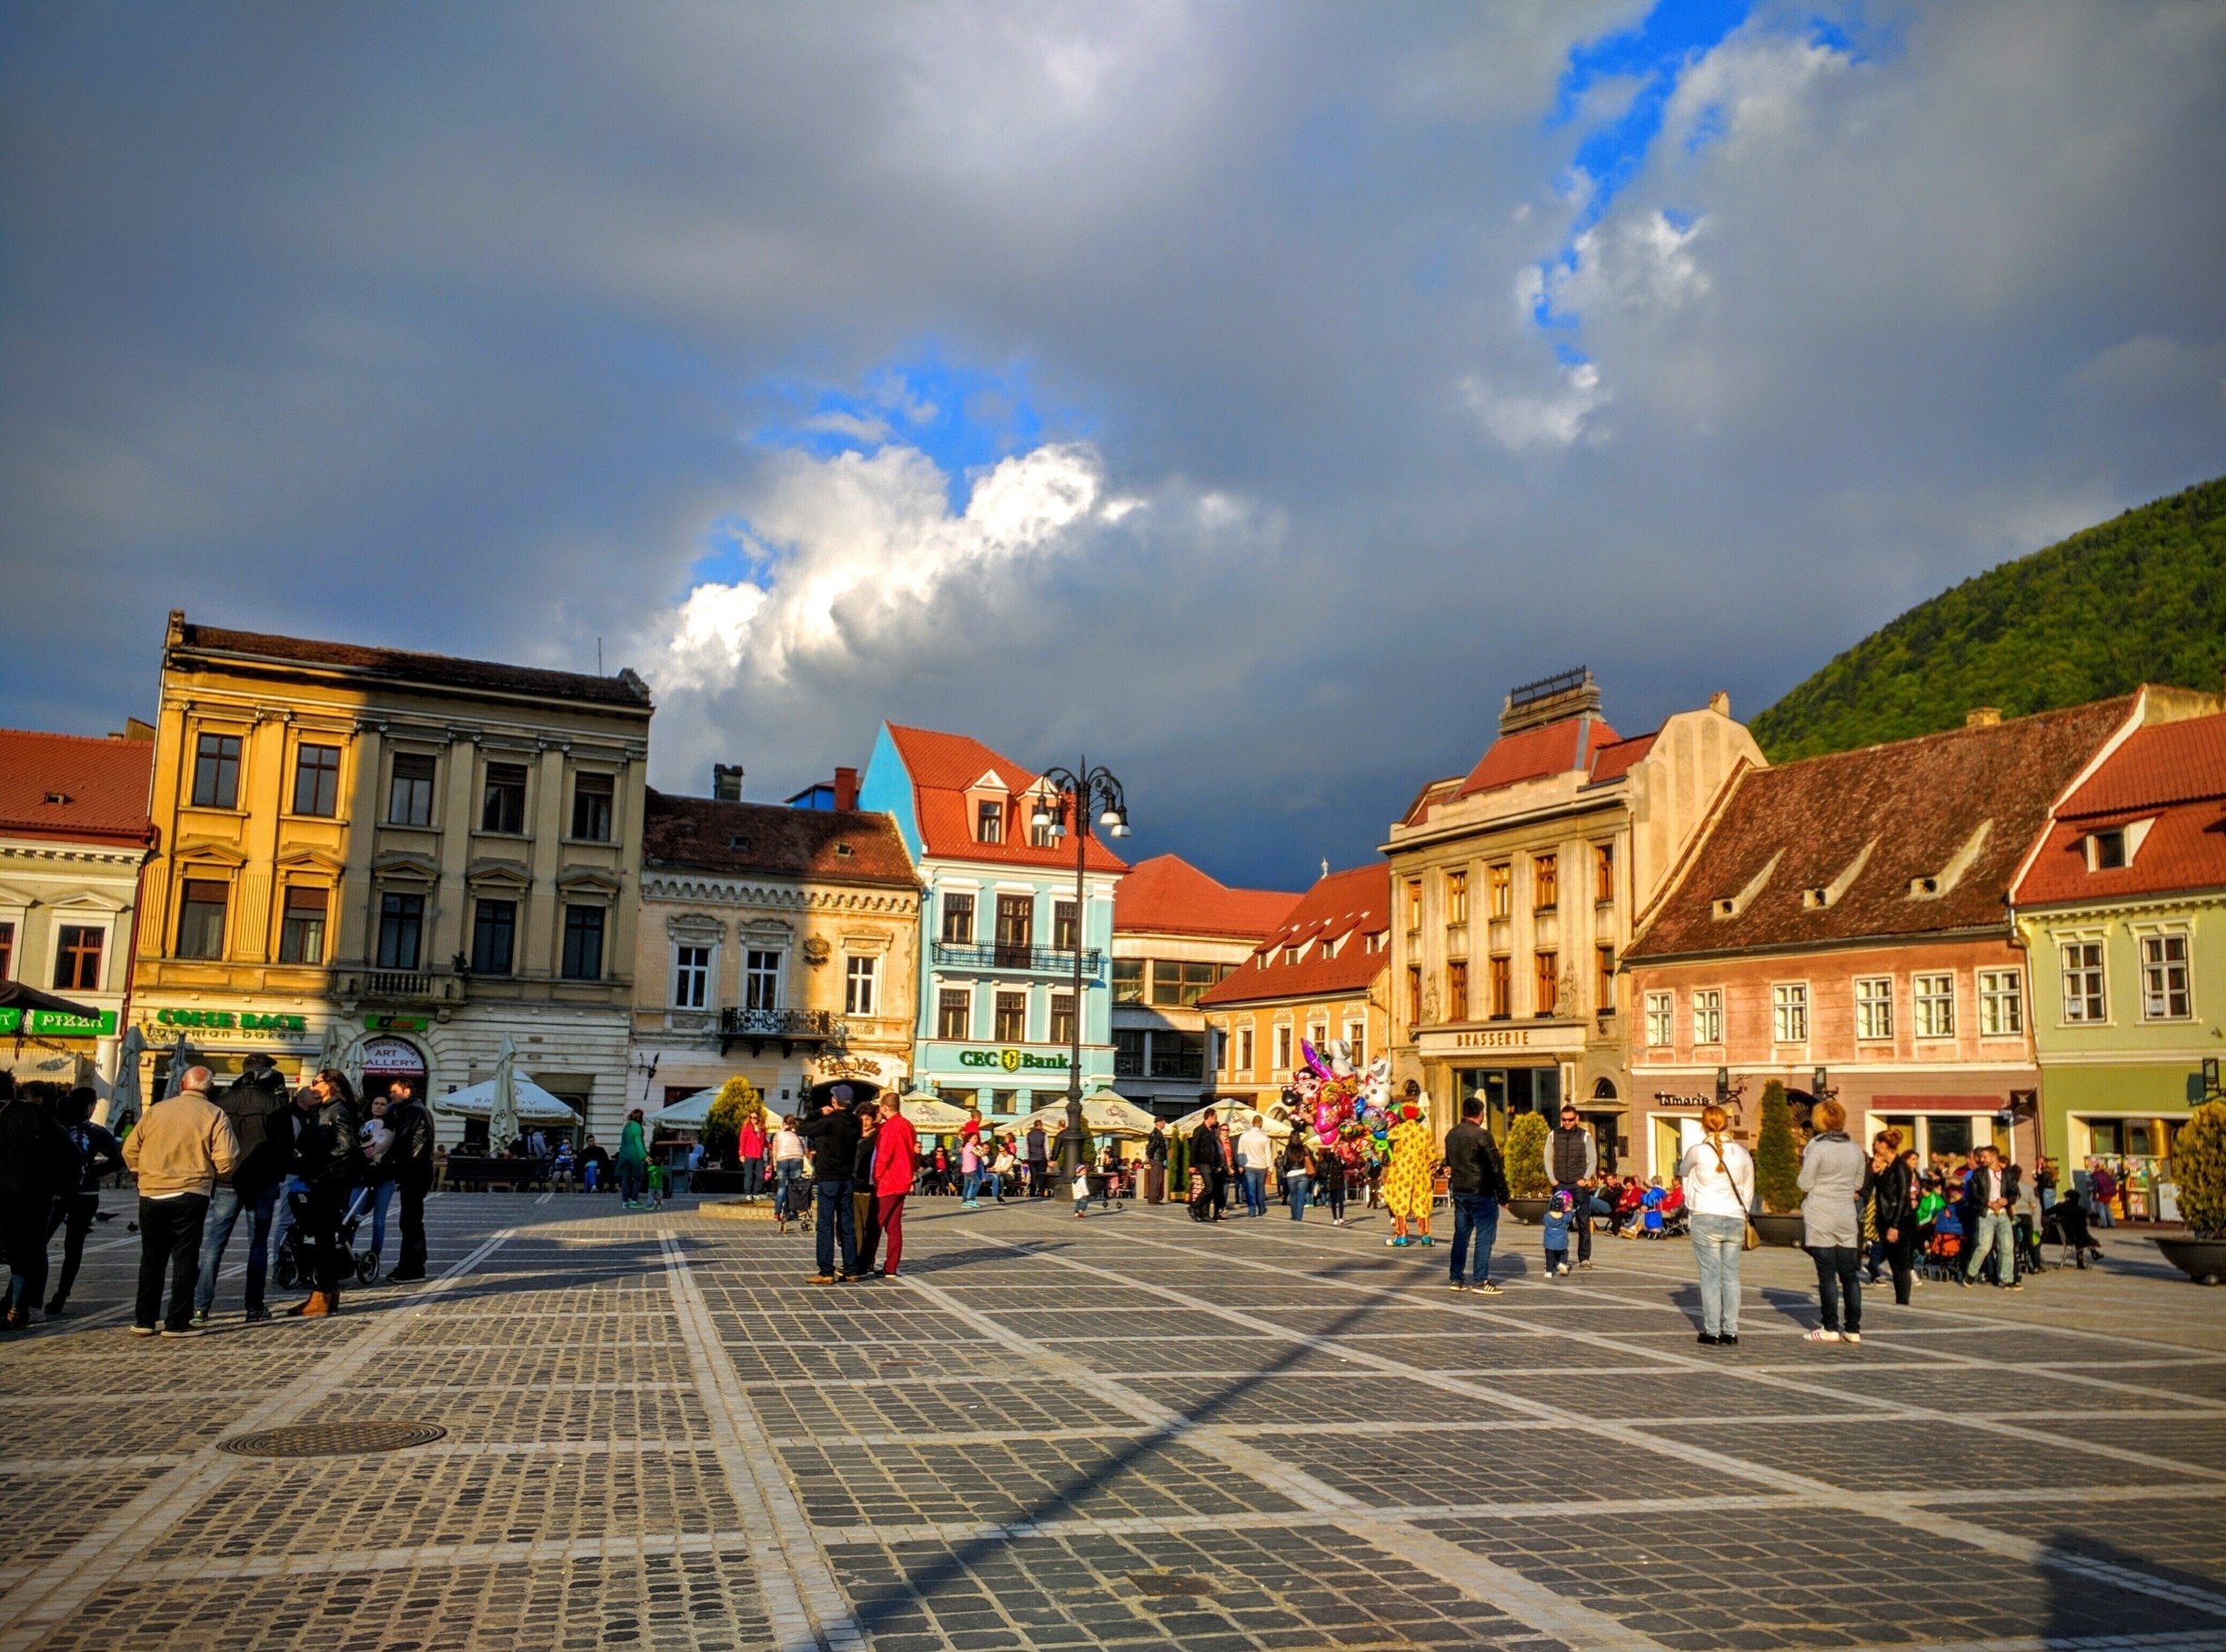 Currently in Brasov!  I ran away from Bucharest and ended up here.  This is more my style, quaint medieval town that offers the simple things.  #alwayswanderlust